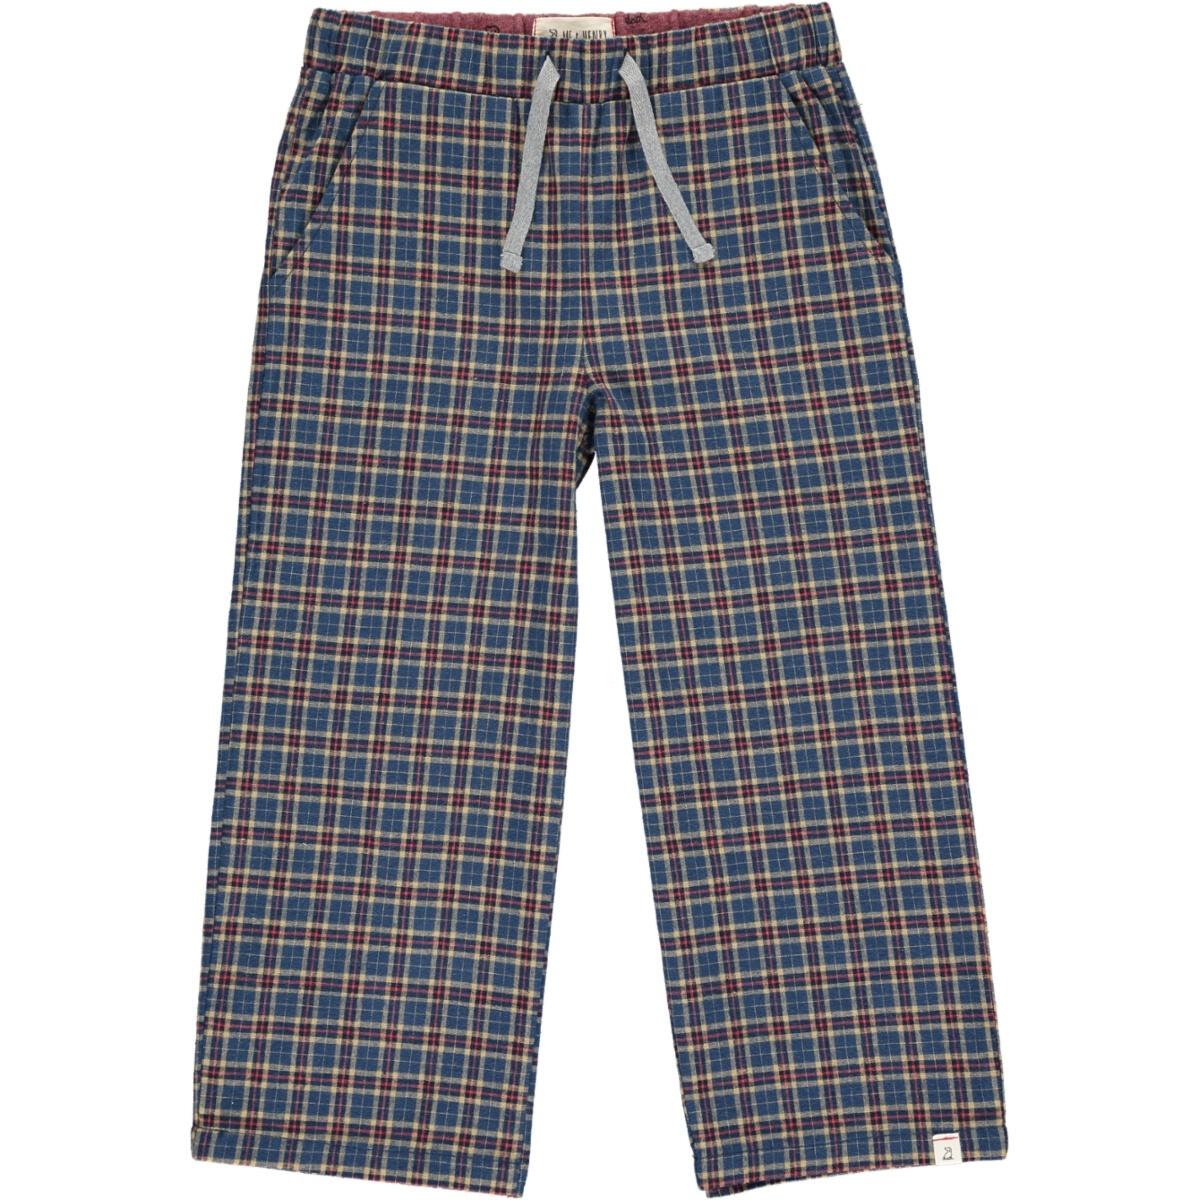 Rockford Lounge Pants Navy/Red Plaid